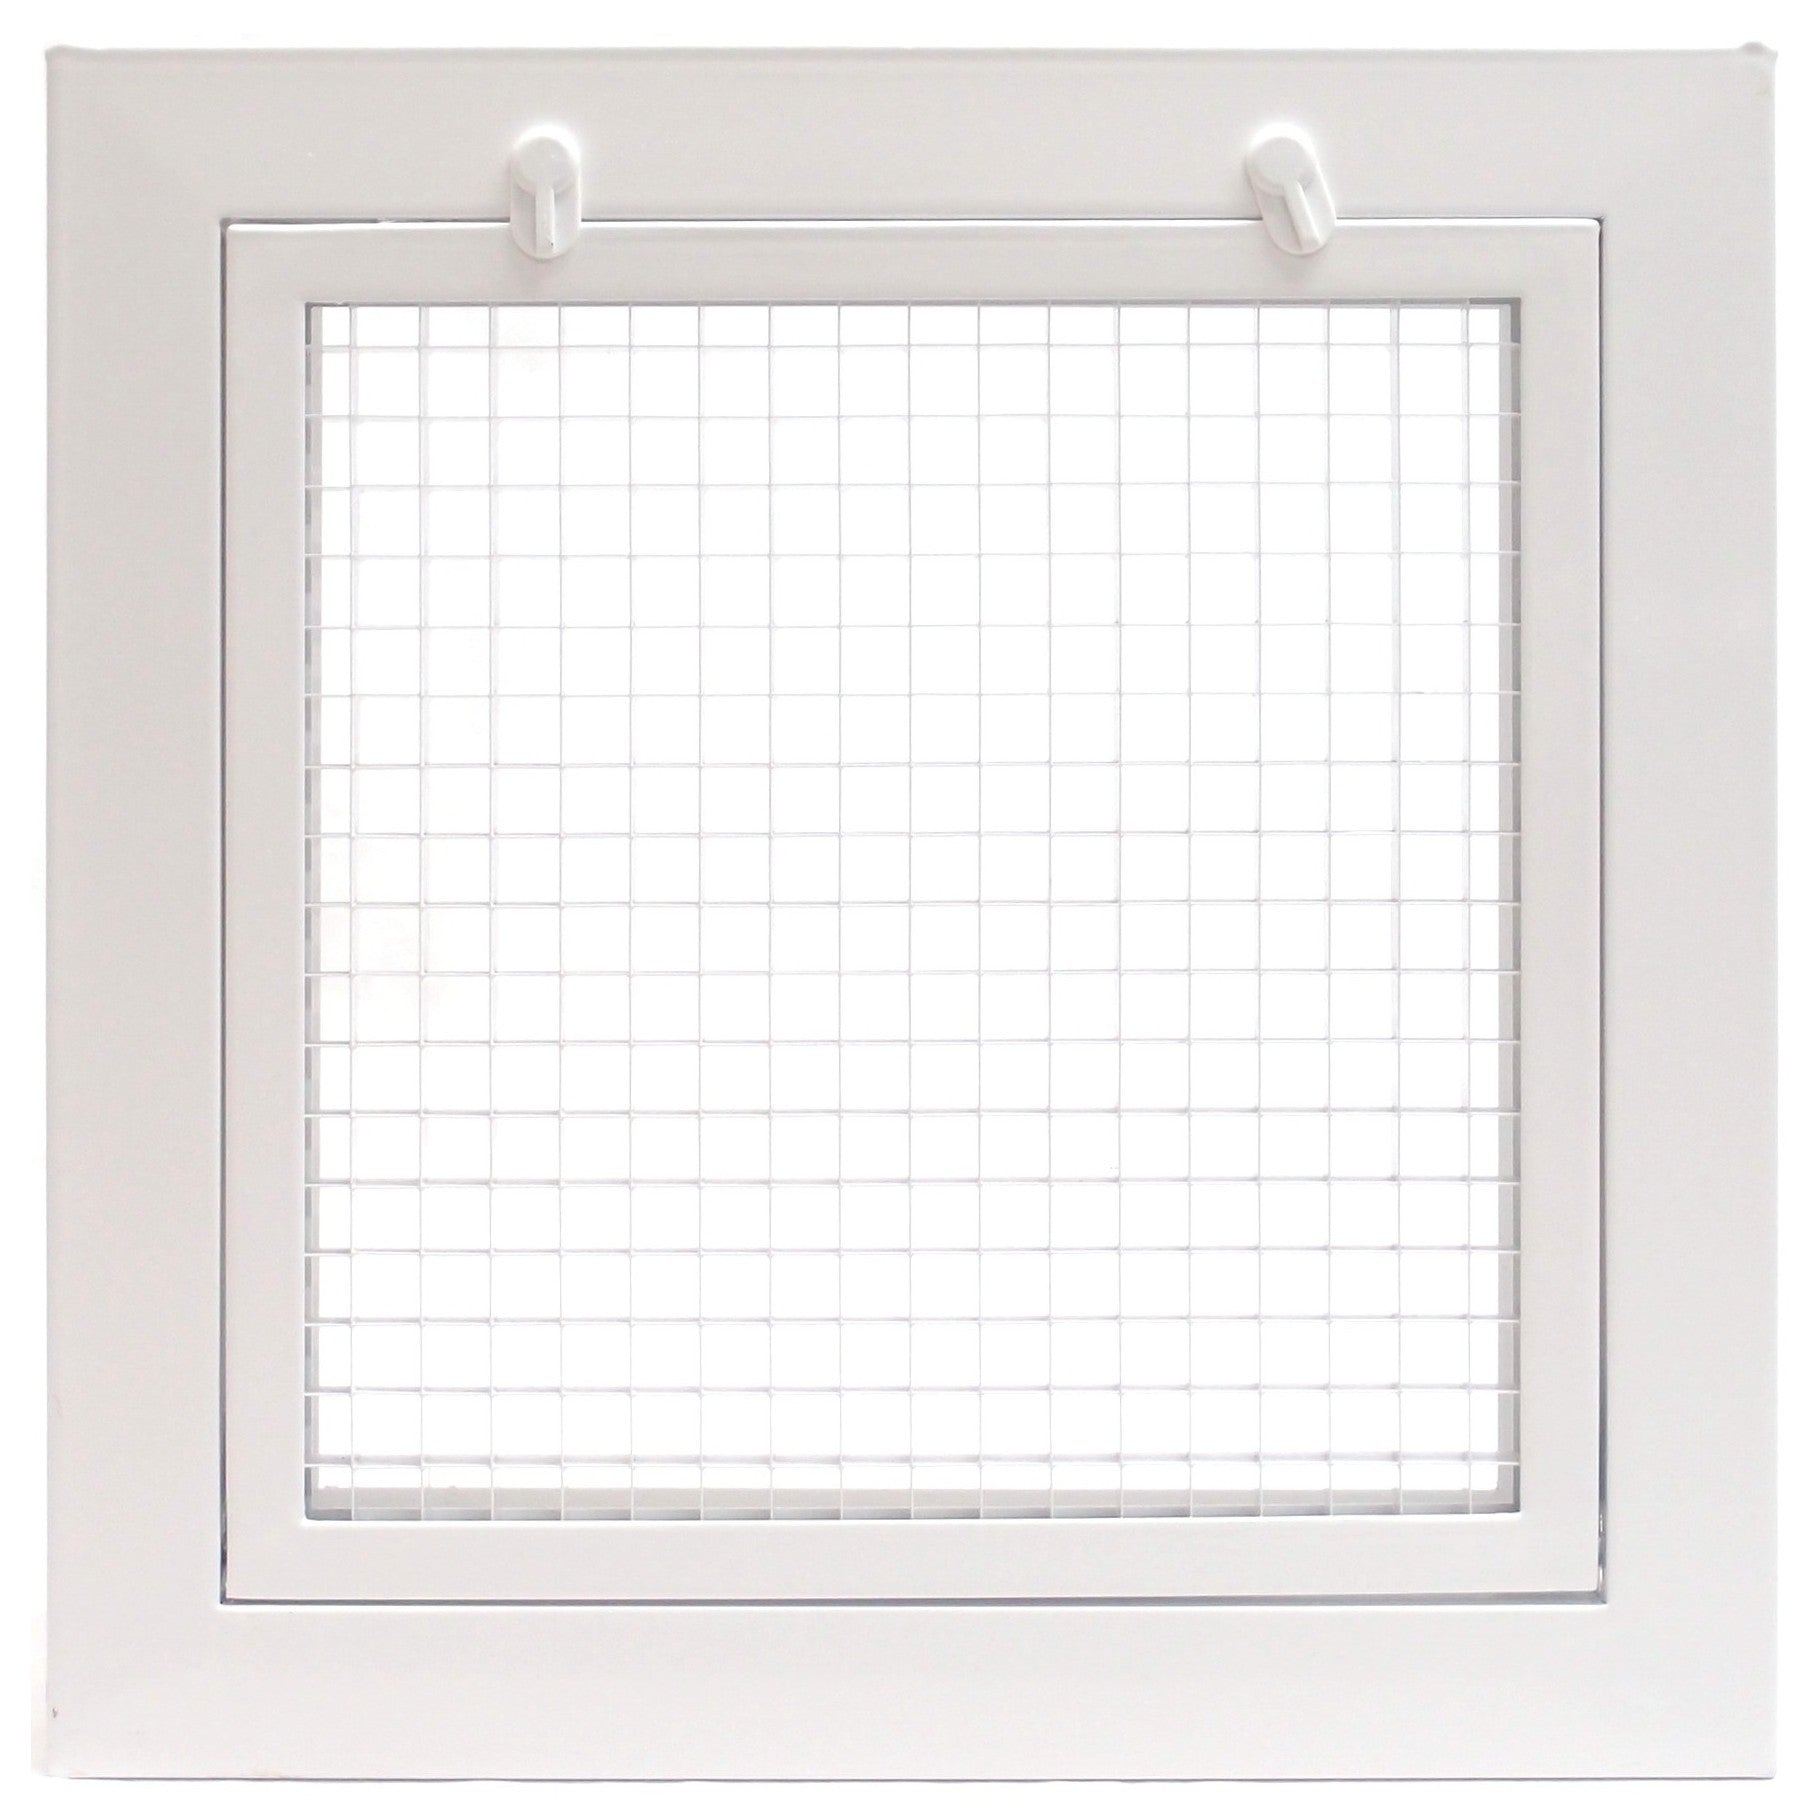 34" x 6" Cube Core Eggcrate Return Air Filter Grille for 1" Filter